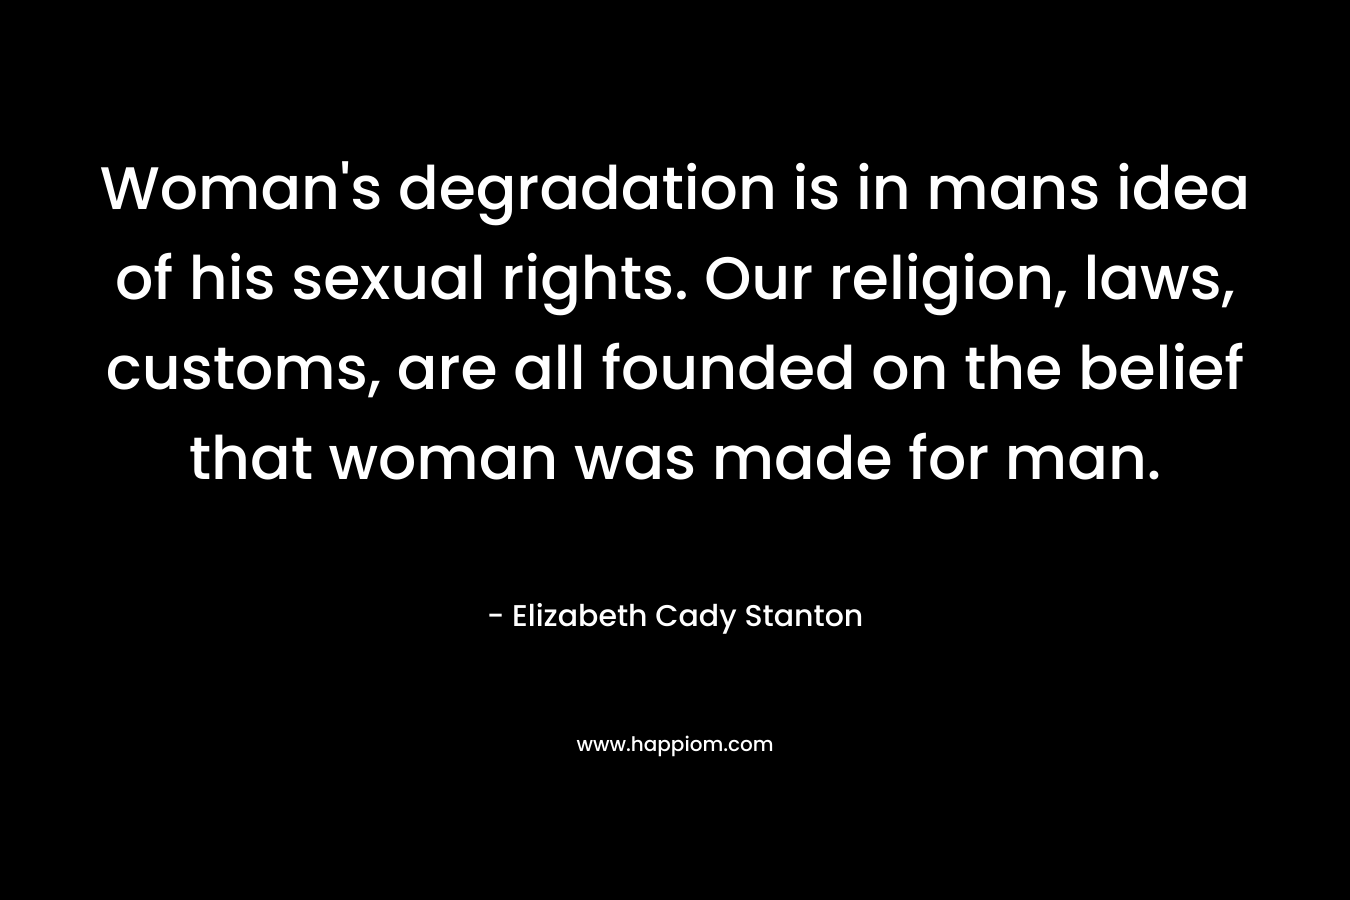 Woman’s degradation is in mans idea of his sexual rights. Our religion, laws, customs, are all founded on the belief that woman was made for man. – Elizabeth Cady Stanton